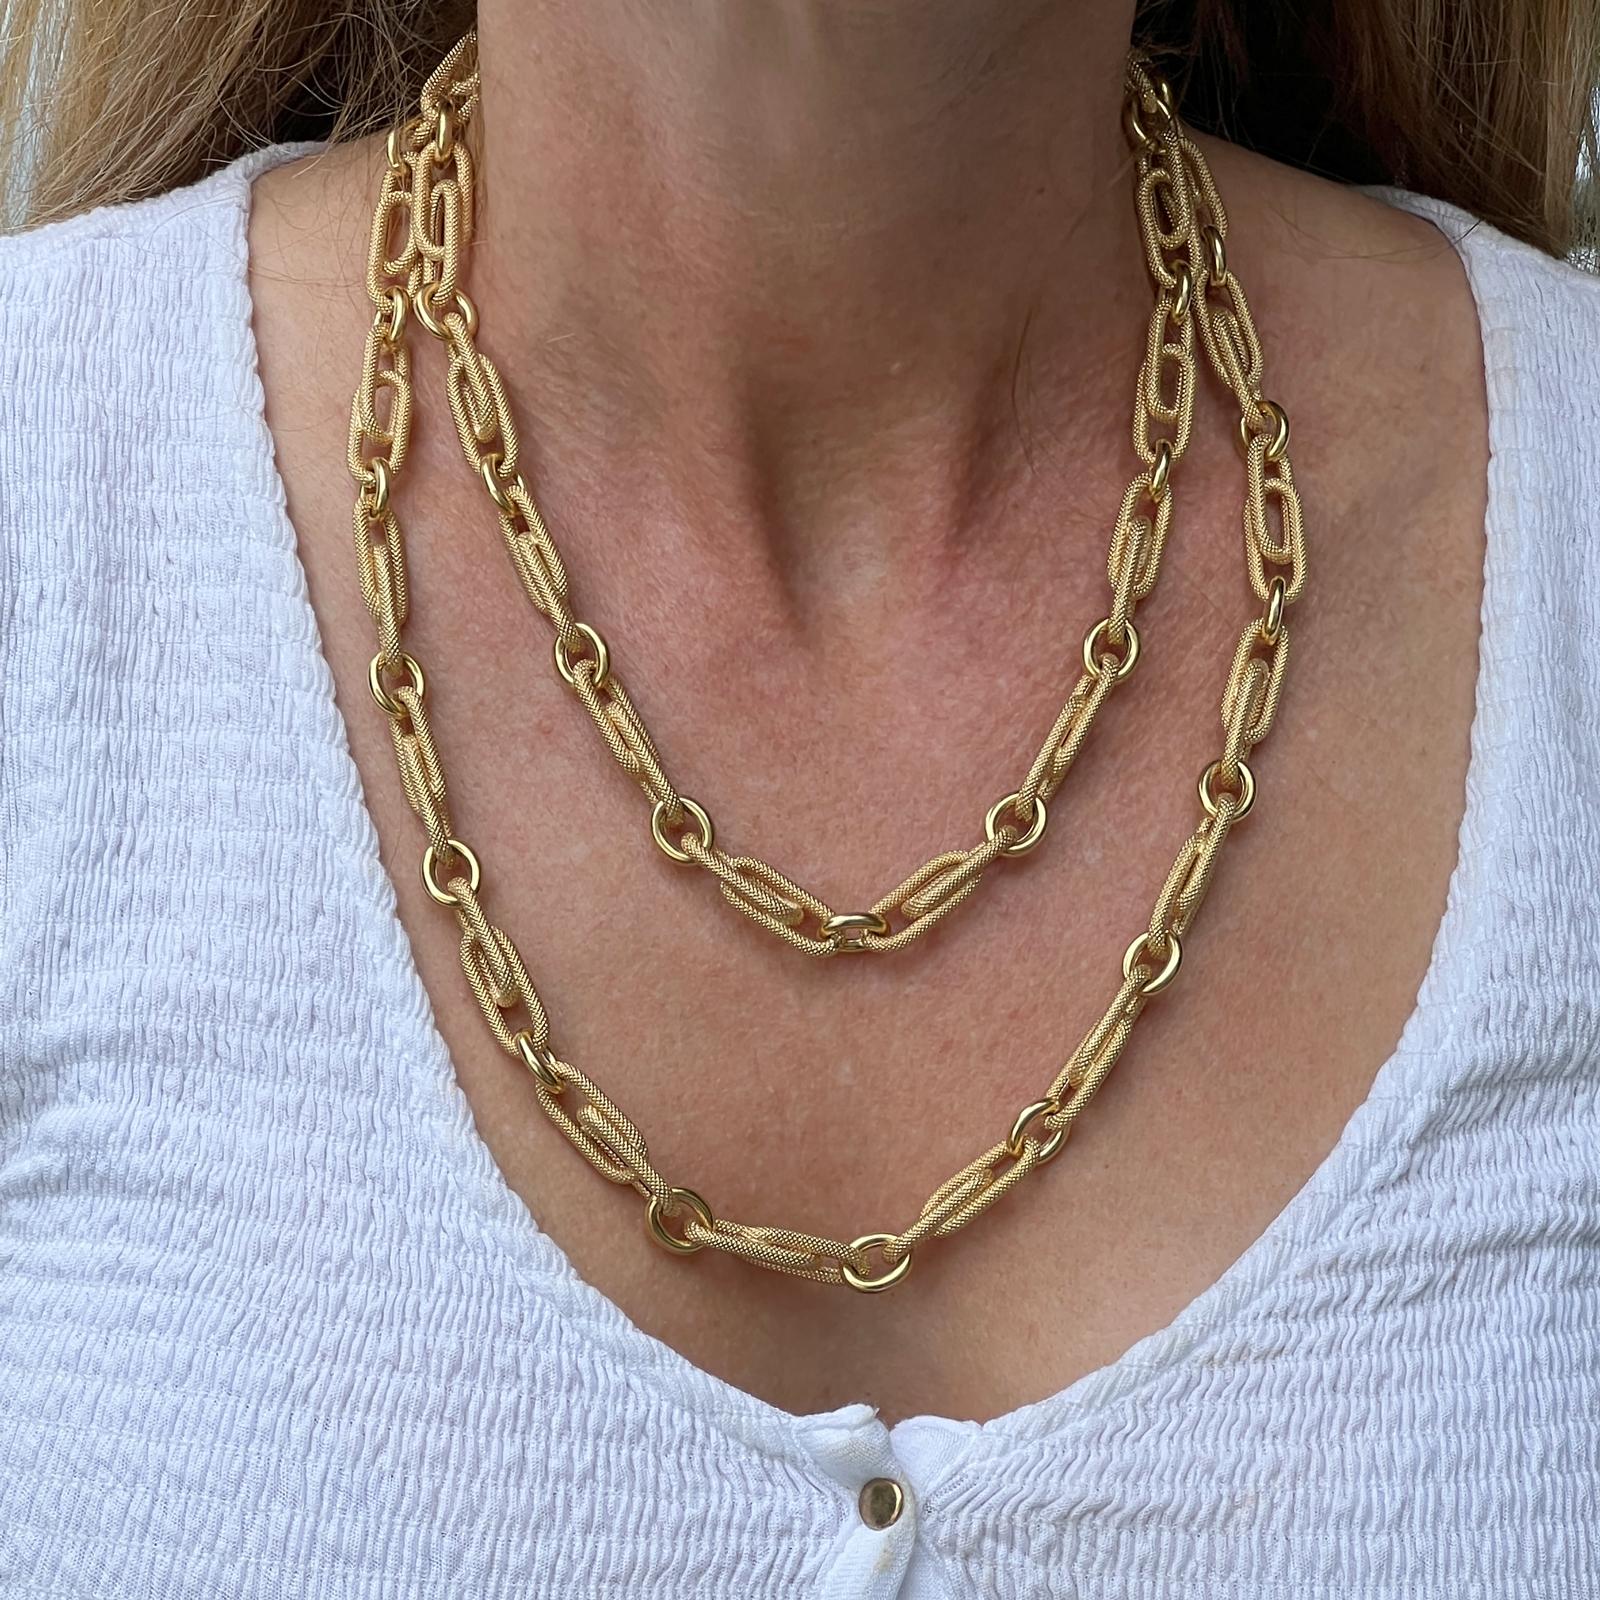 Original paperclip necklace handcrafted in 18 karat textured yellow gold. The necklace features oval textured paperclip links alternating with high polish round links to make this stylish 40 inch necklace. The necklace can be worn long or doubled